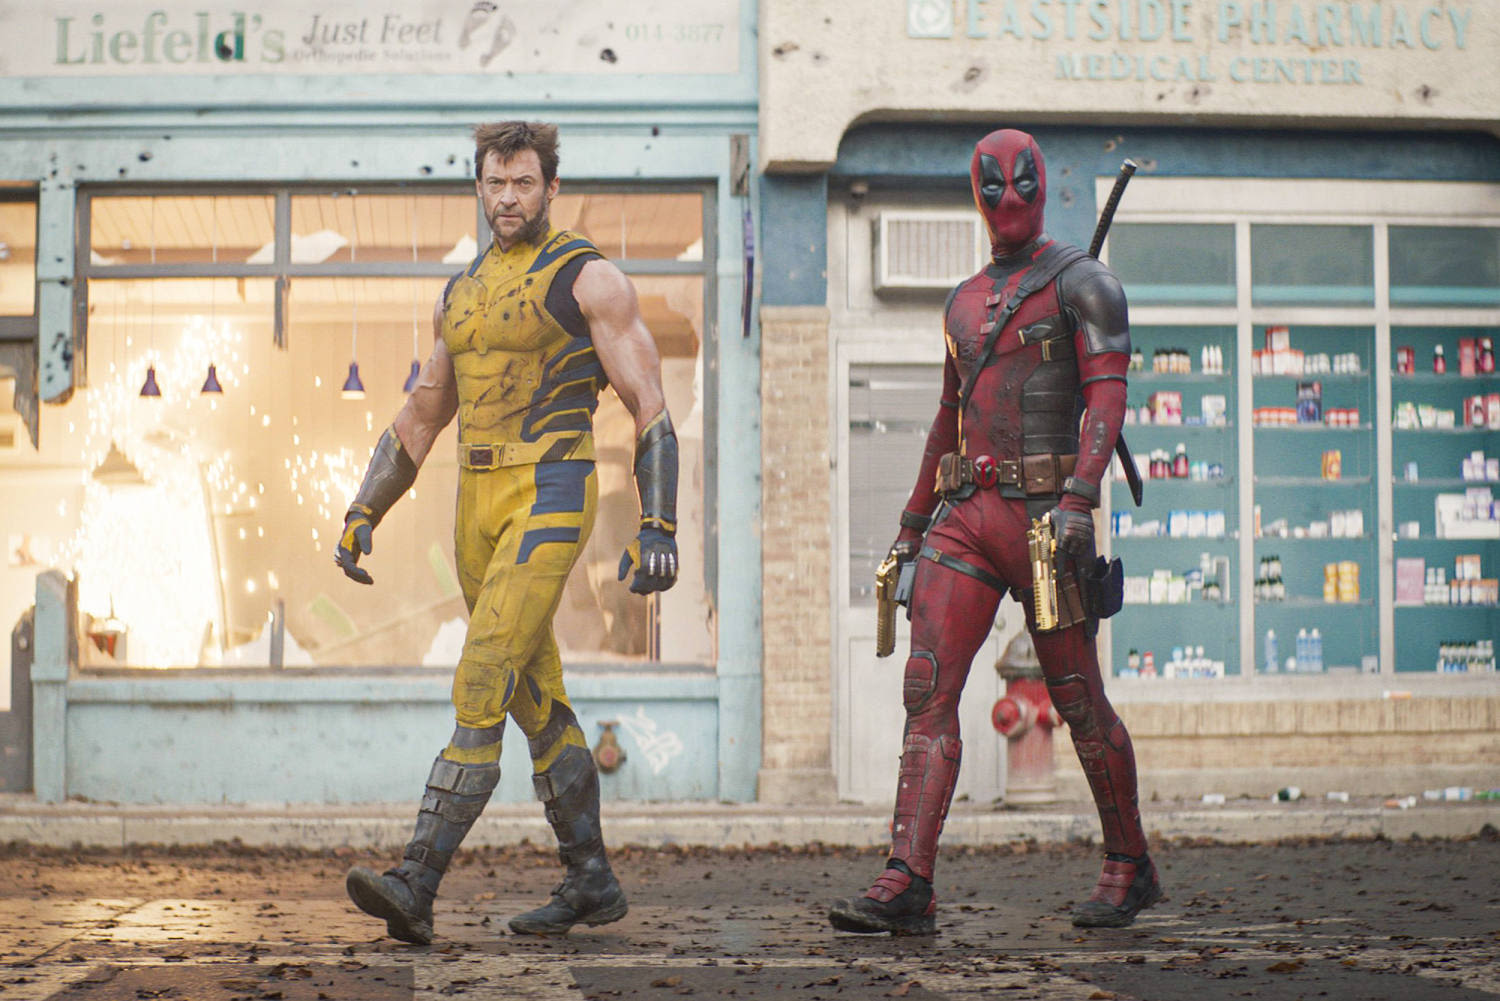 'Deadpool & Wolverine' dominates at the box office with $205 million opening